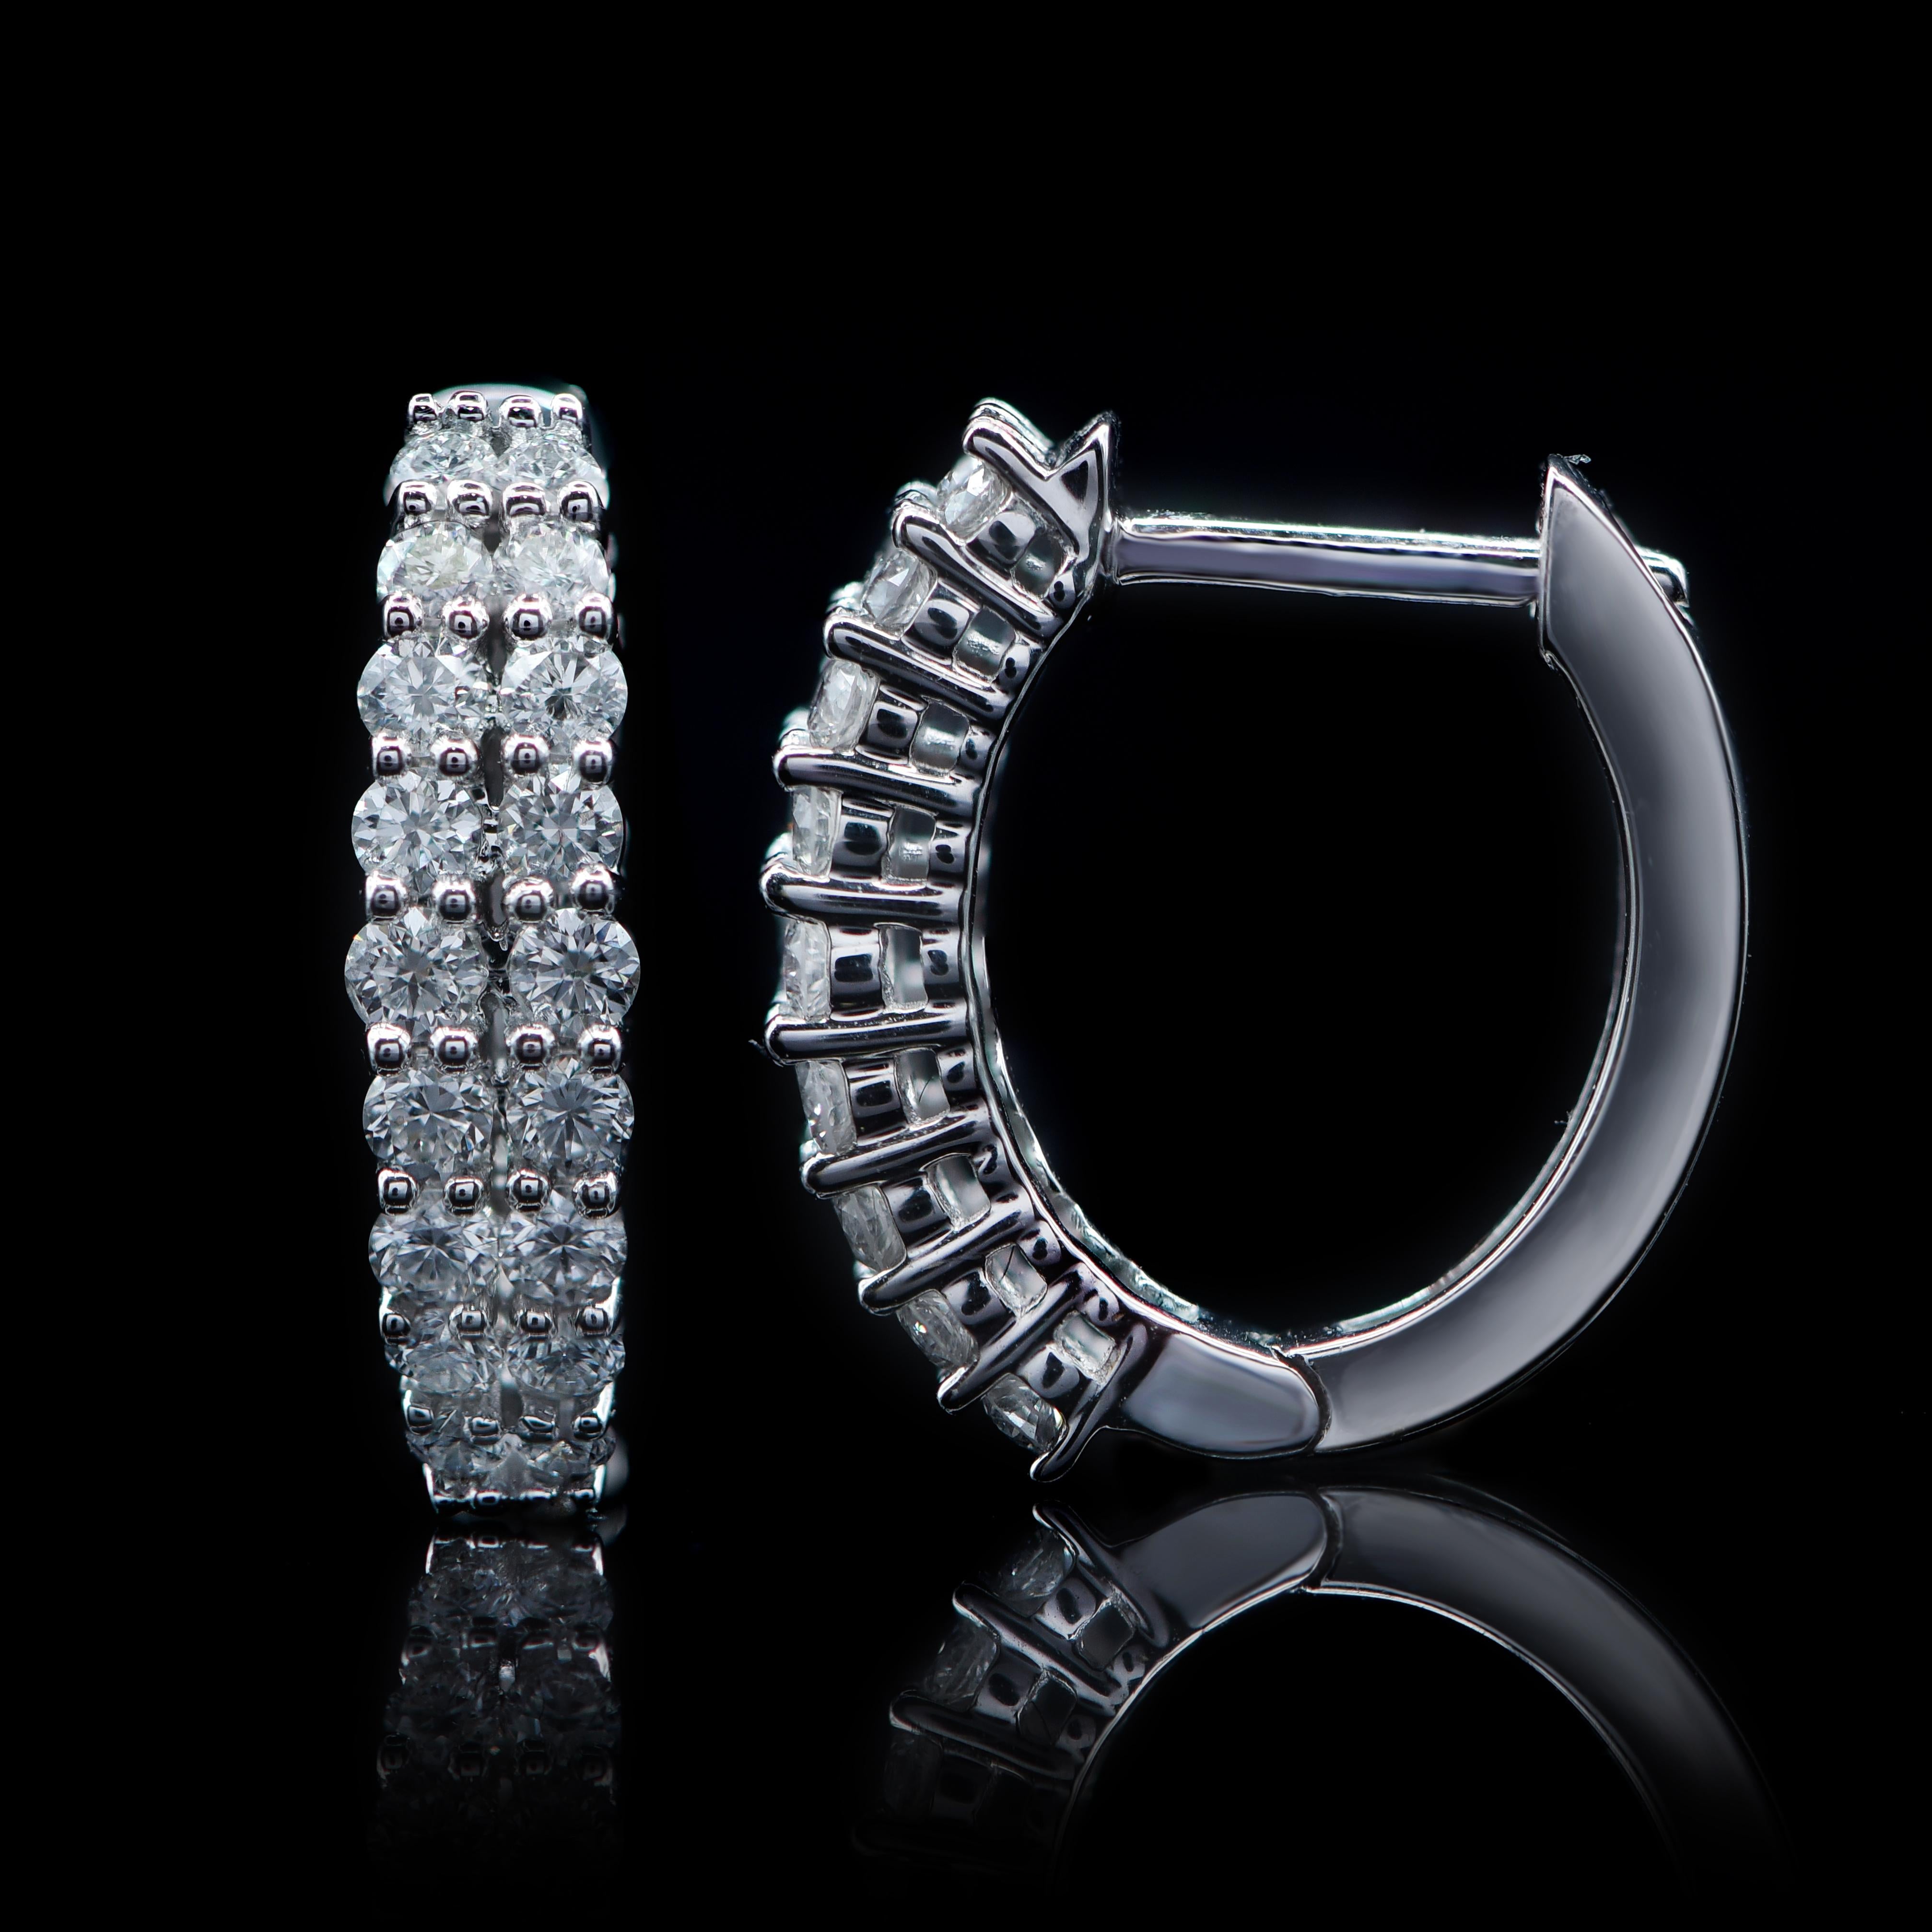 These designer diamond hoops earrings are expertly hand-crafted in 18-karat white gold and embedded with 36 brilliant natural diamonds in prong setting. The diamonds are graded H-I Color, I2 Clarity.